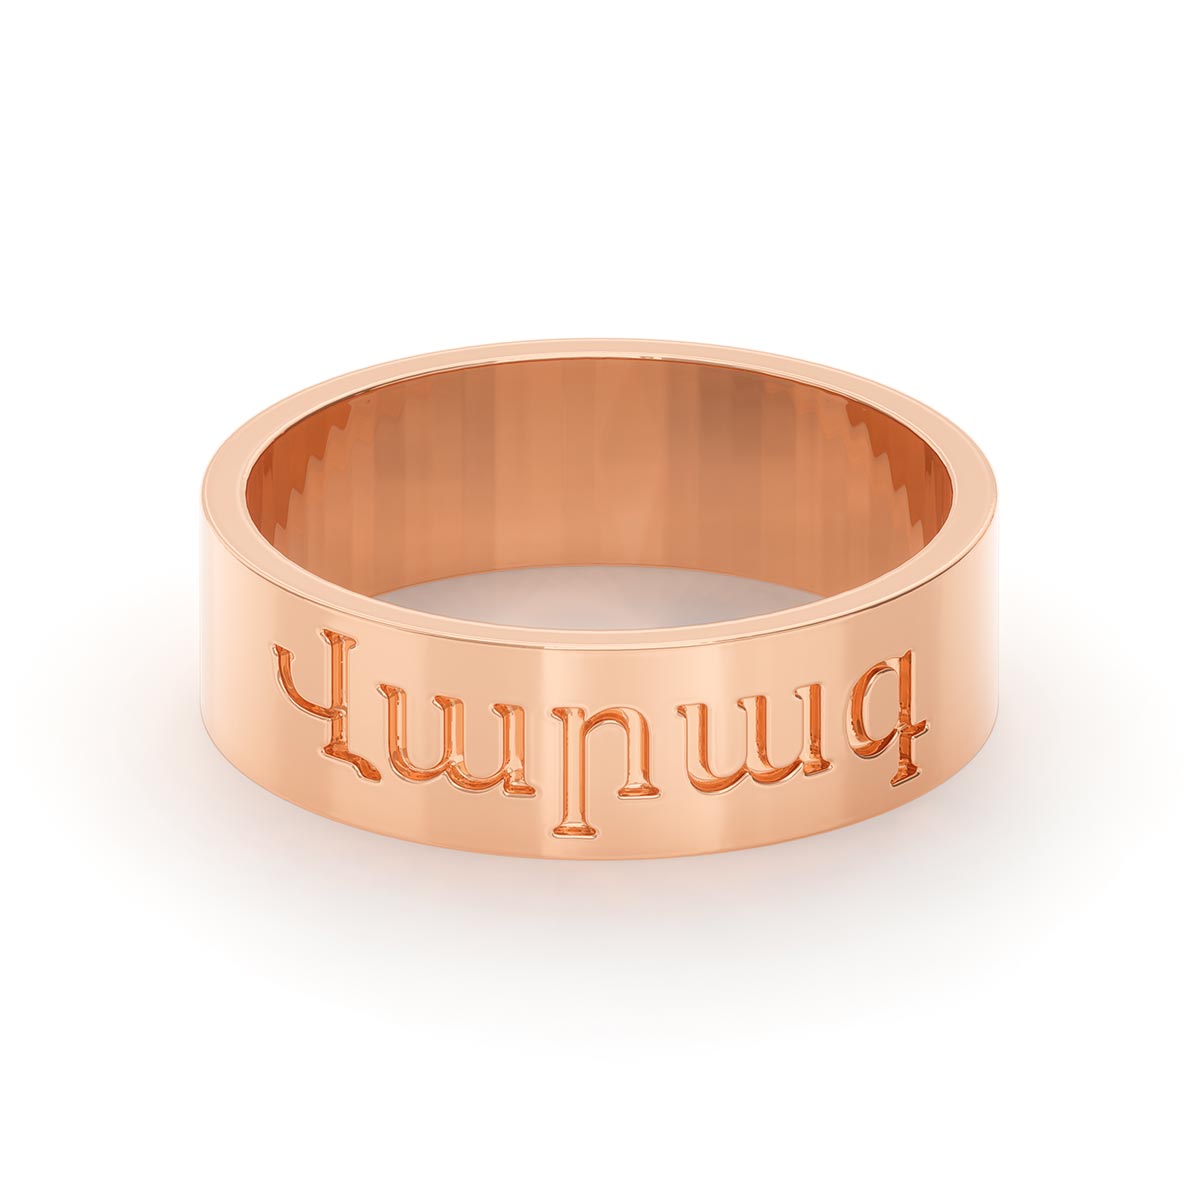 Men's Wide Ring With Armenian Name Engraving